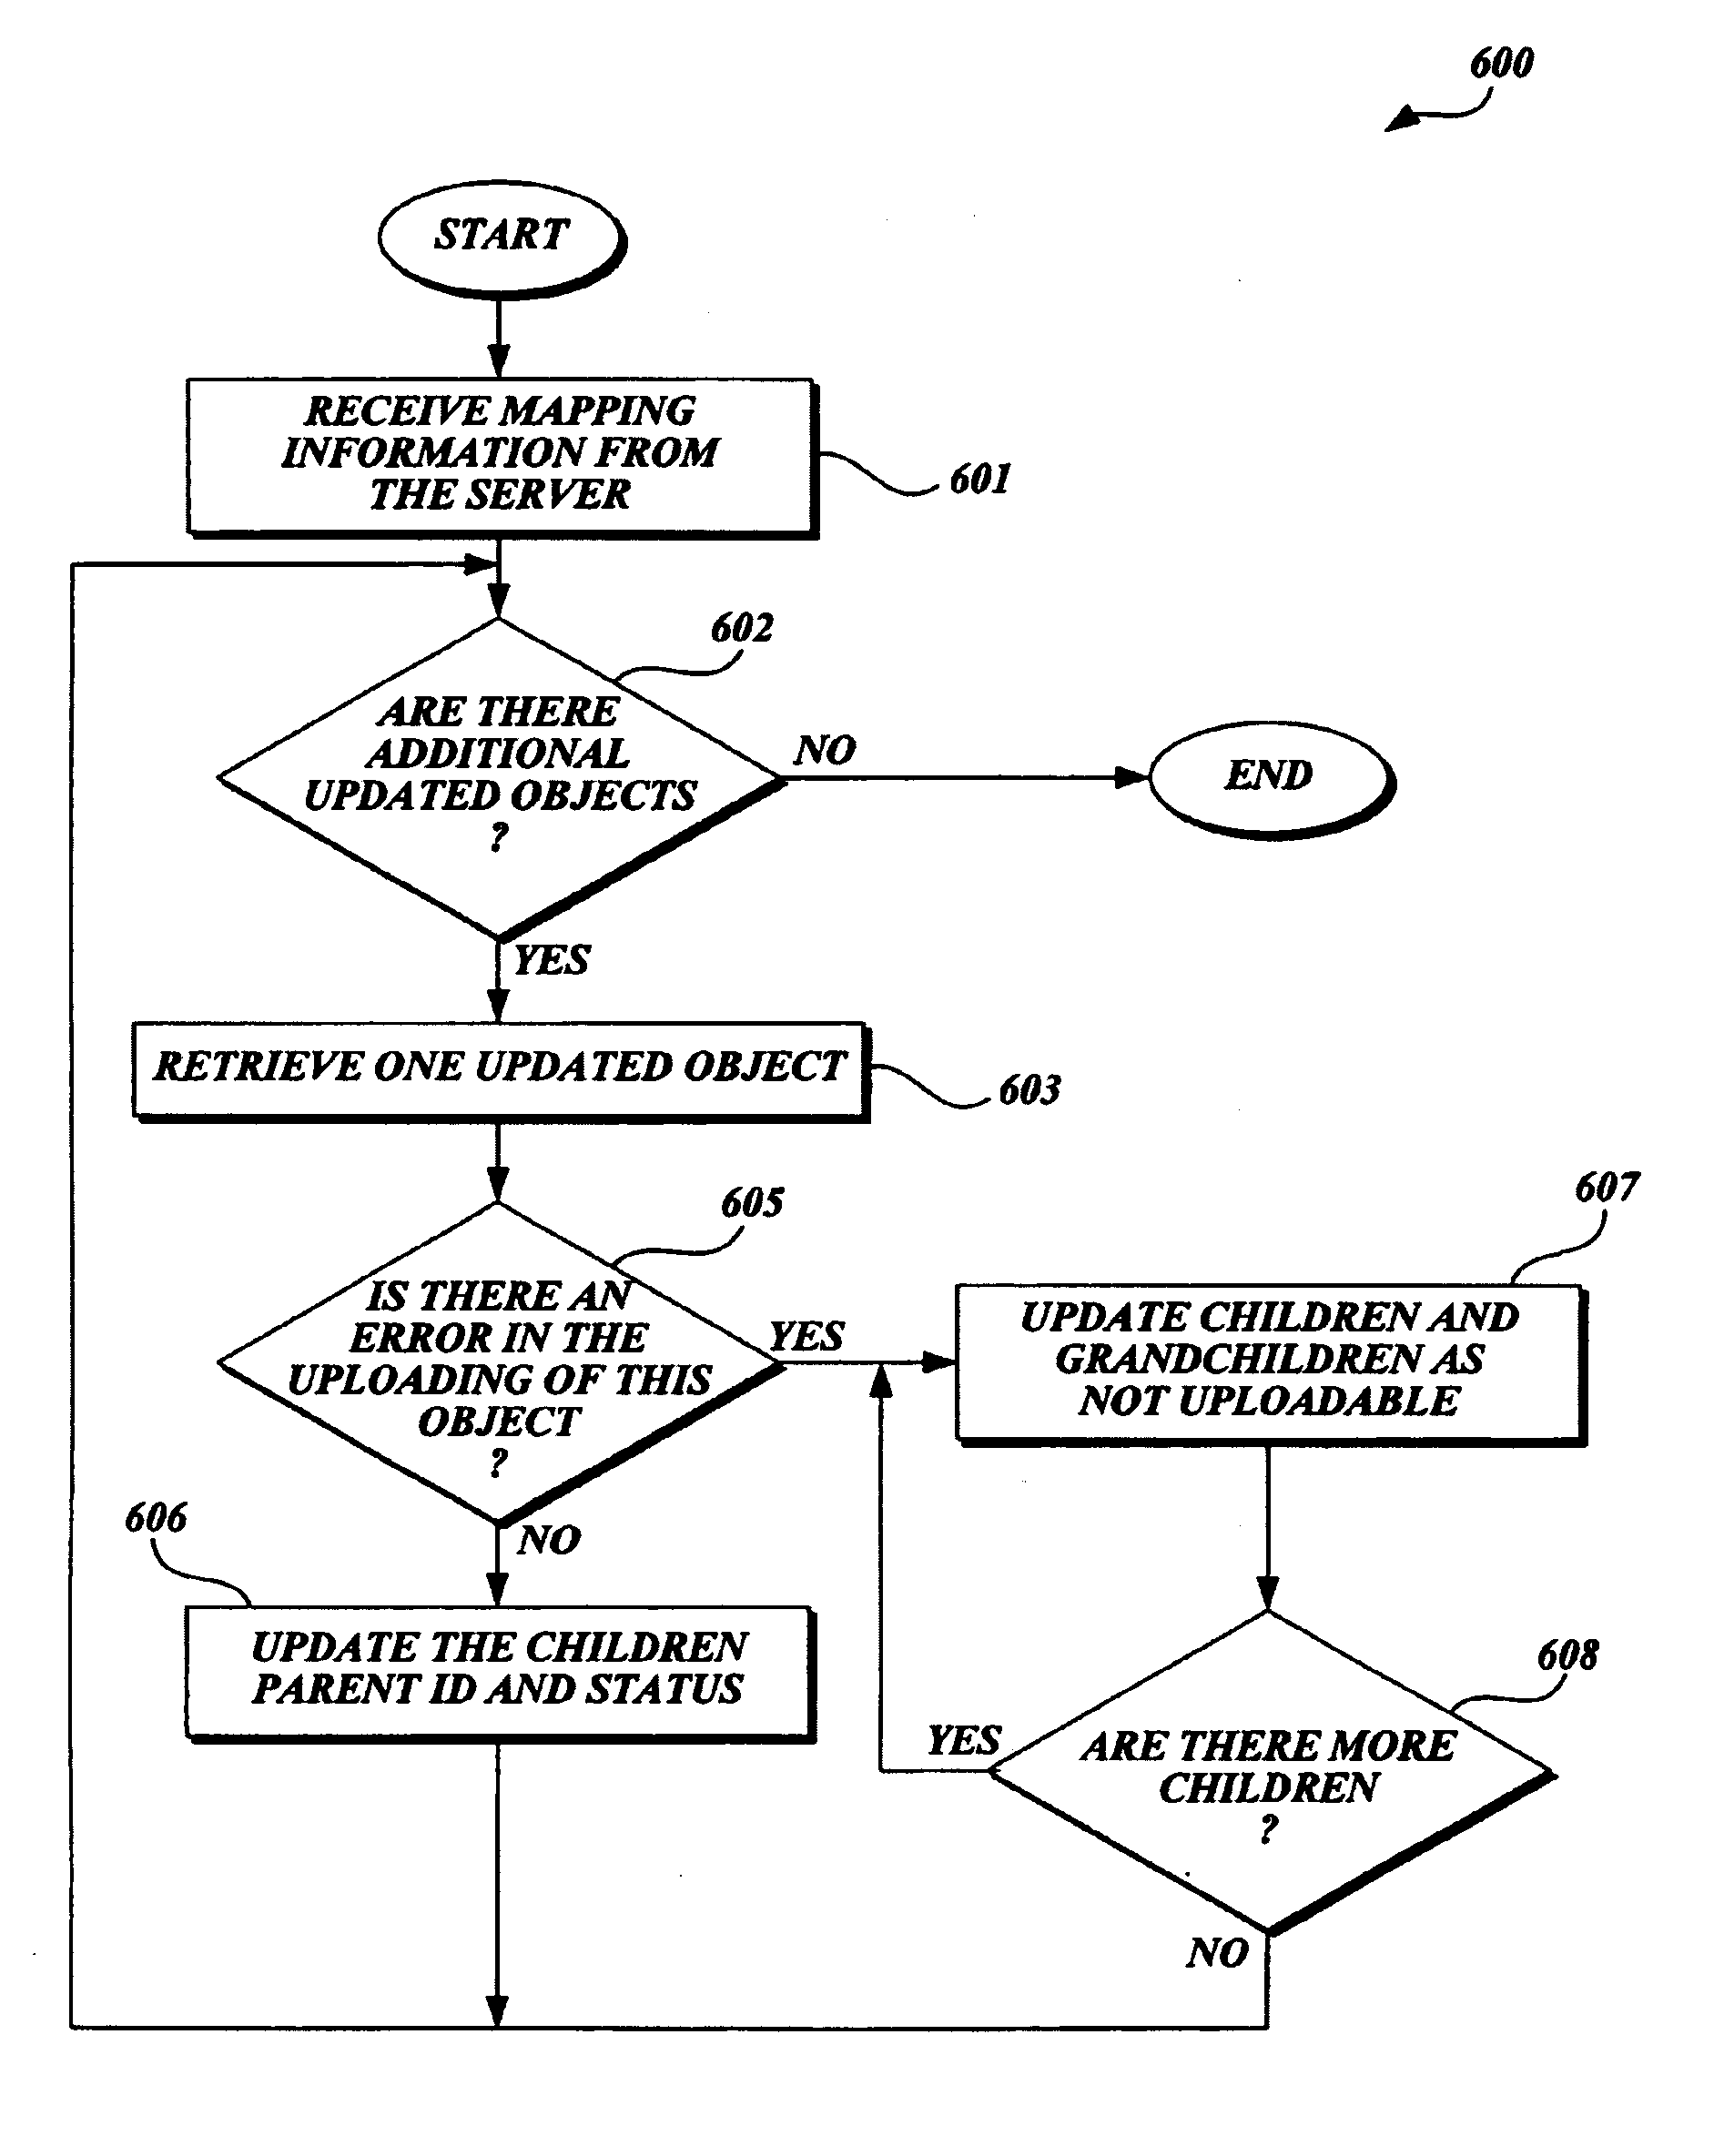 System and method for optimizing the data transfer between mirrored databases stored on both a client and server computer